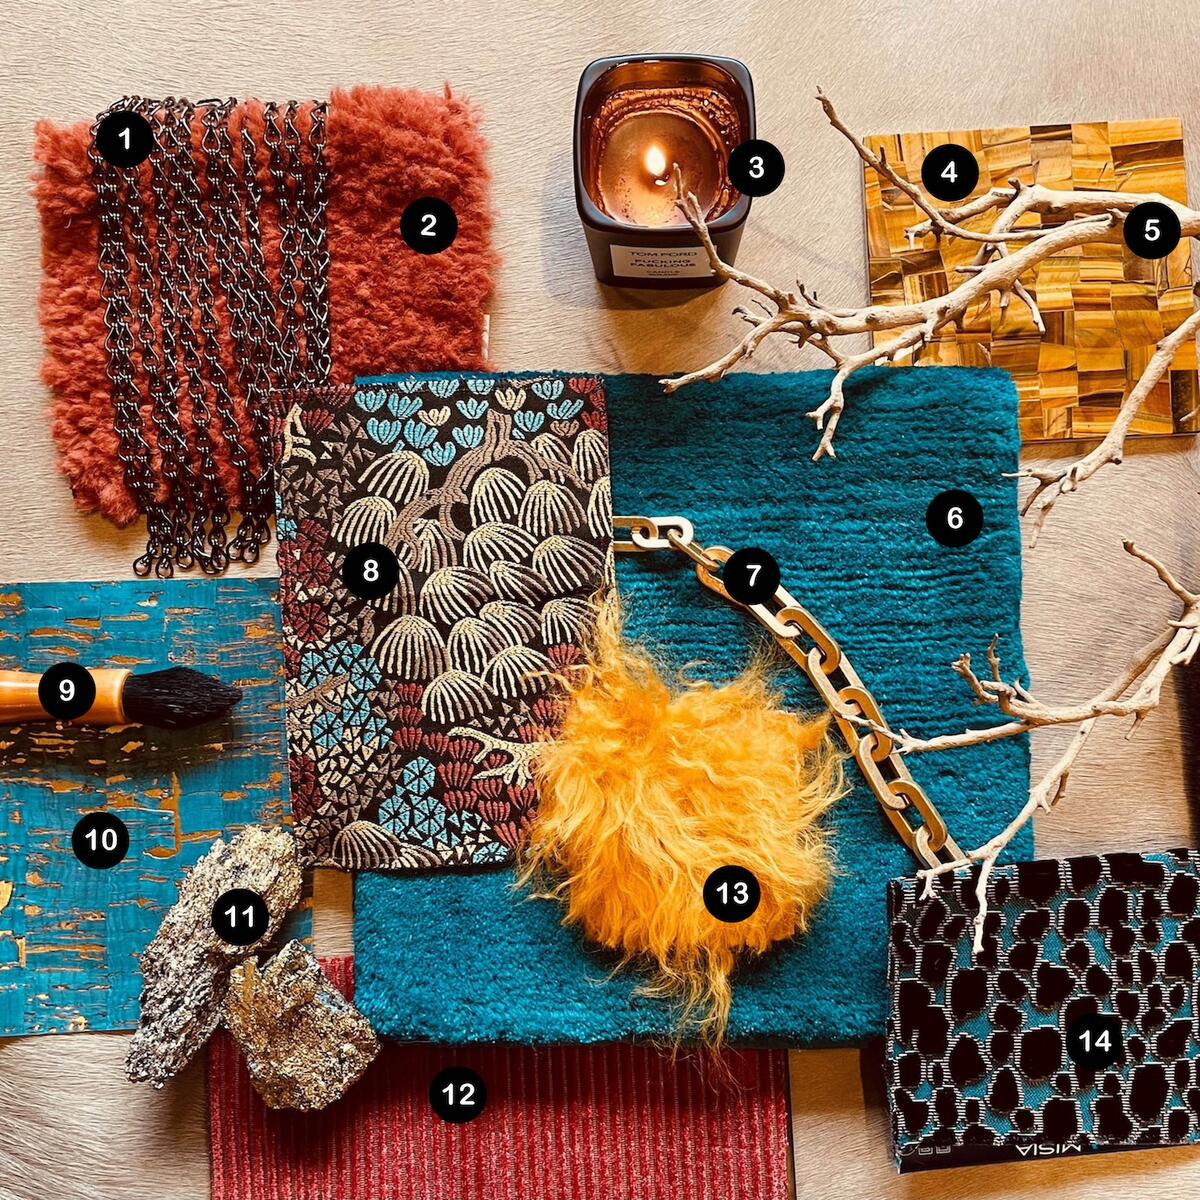 Linda Hartmann’s not-so-elementary mix of rusty reds, teal blues and golden yellows